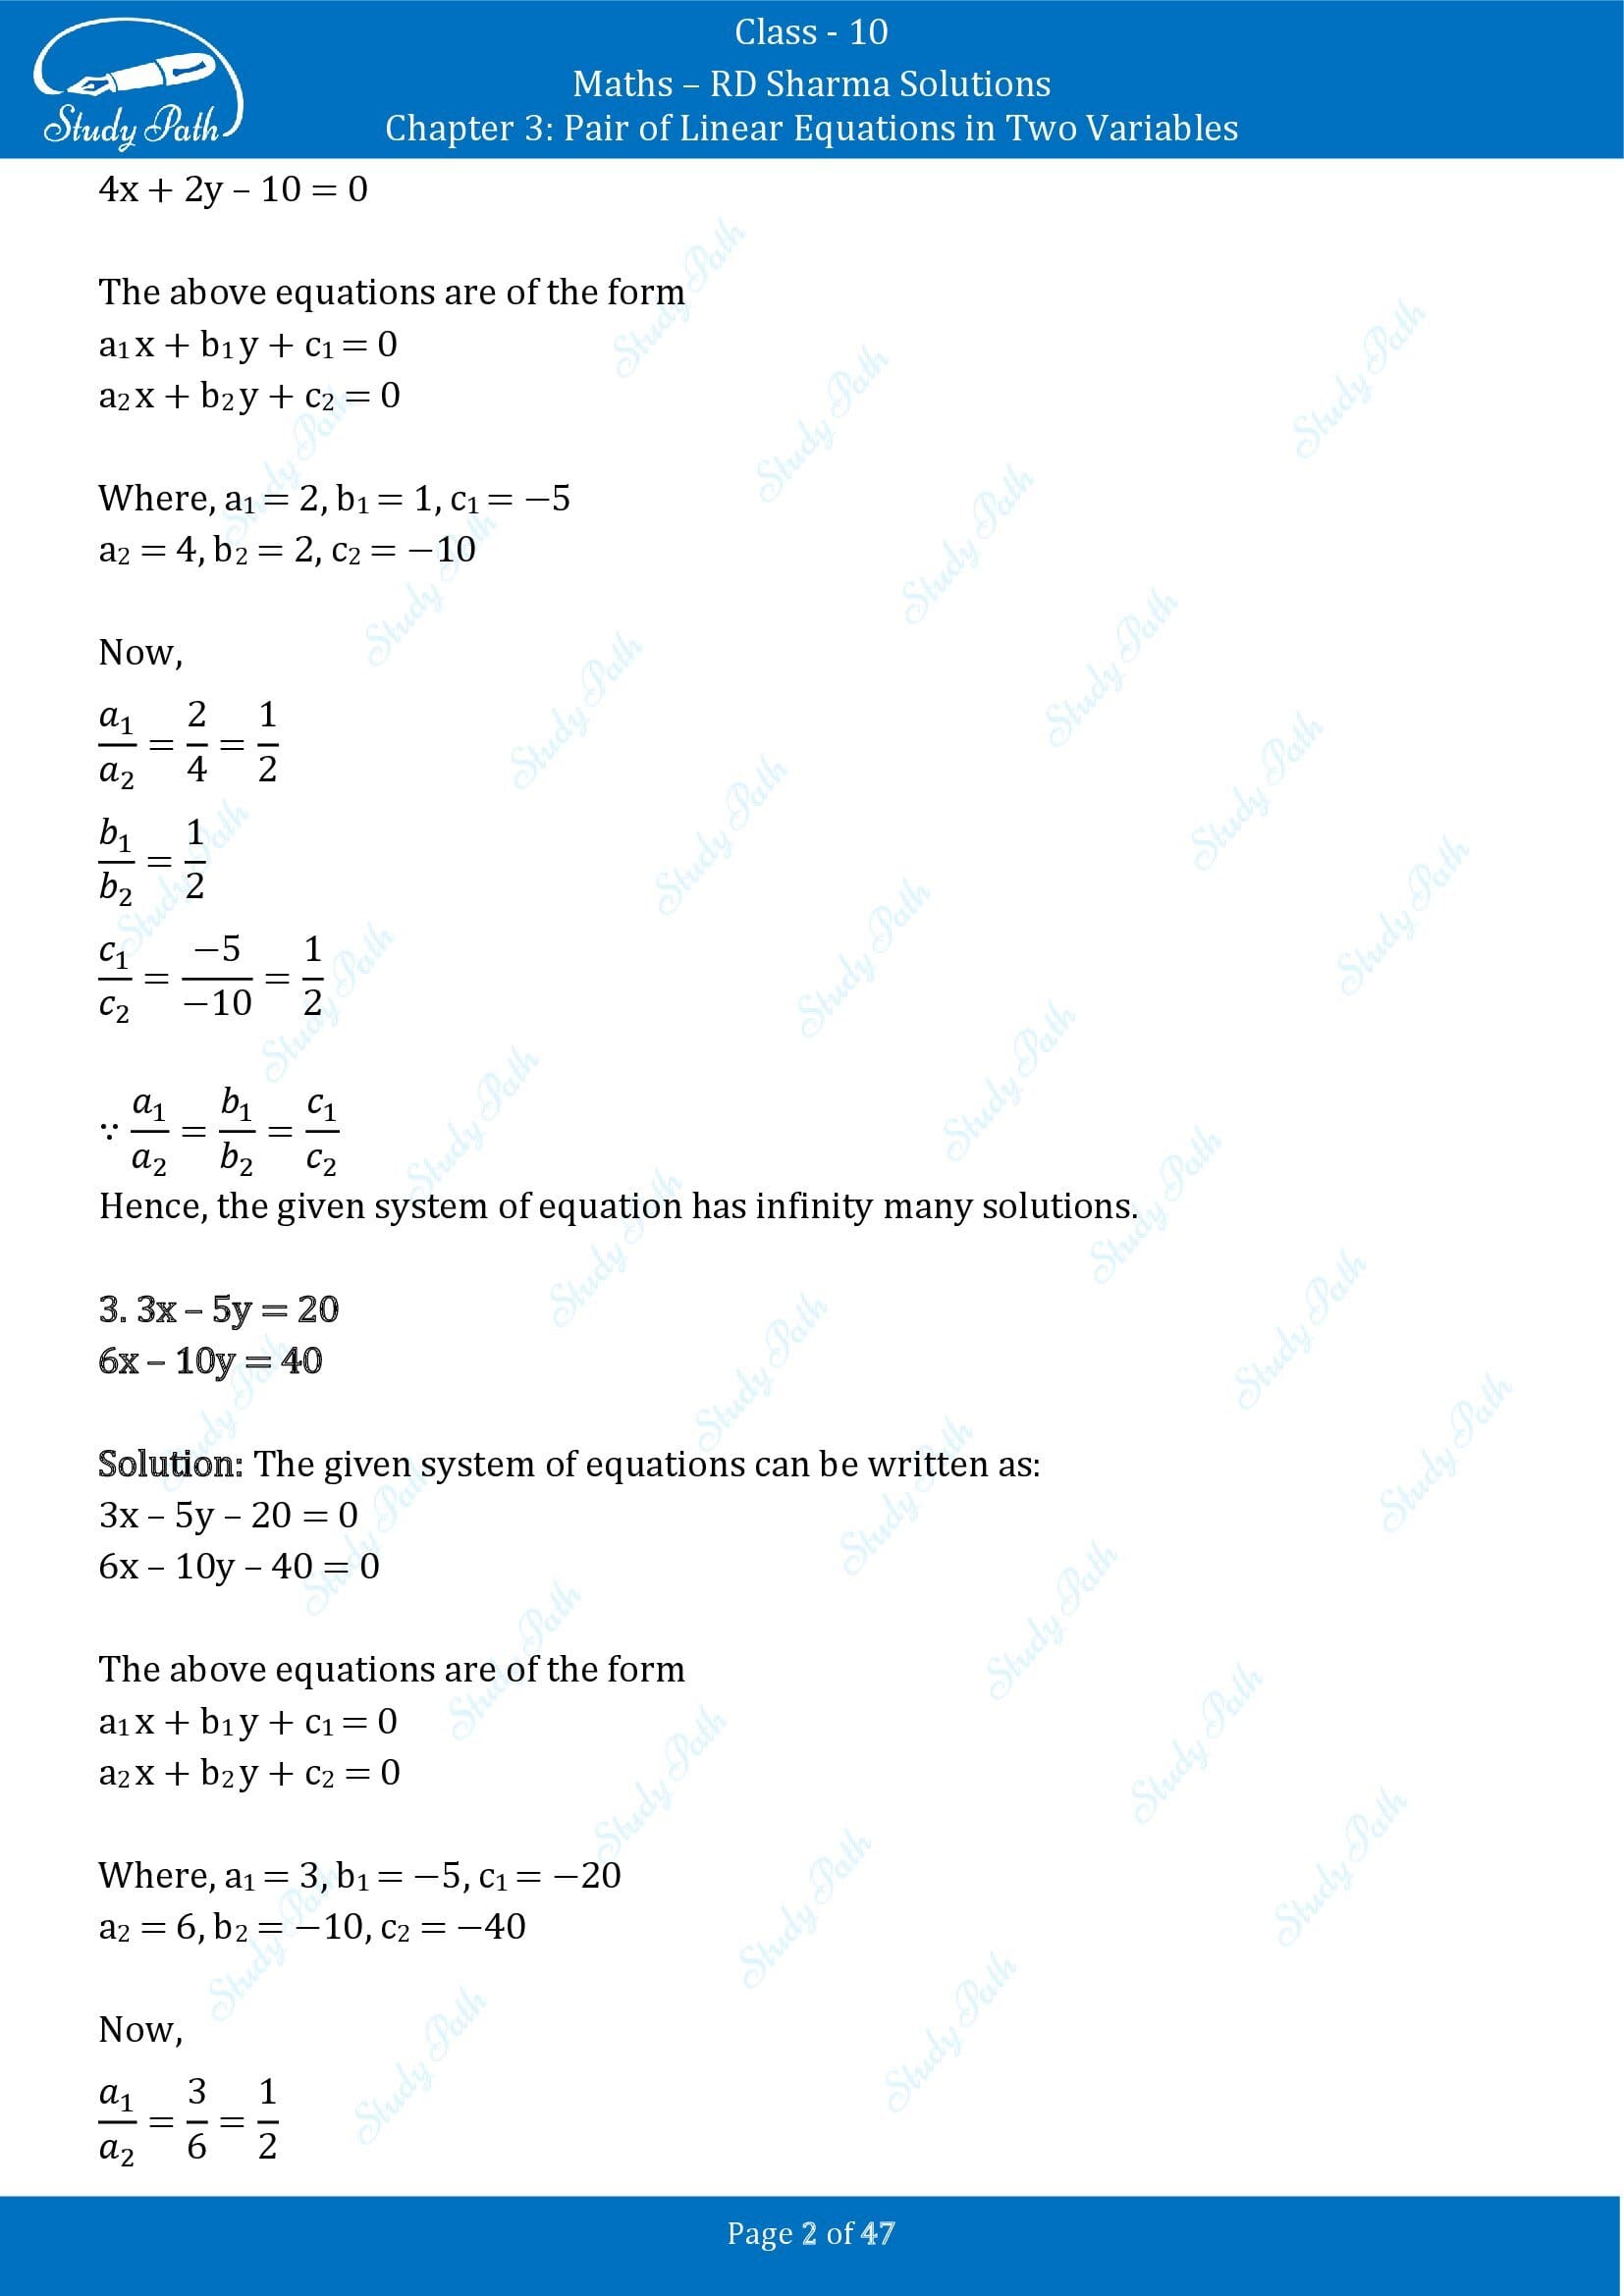 RD Sharma Solutions Class 10 Chapter 3 Pair of Linear Equations in Two Variables Exercise 3.5 00002